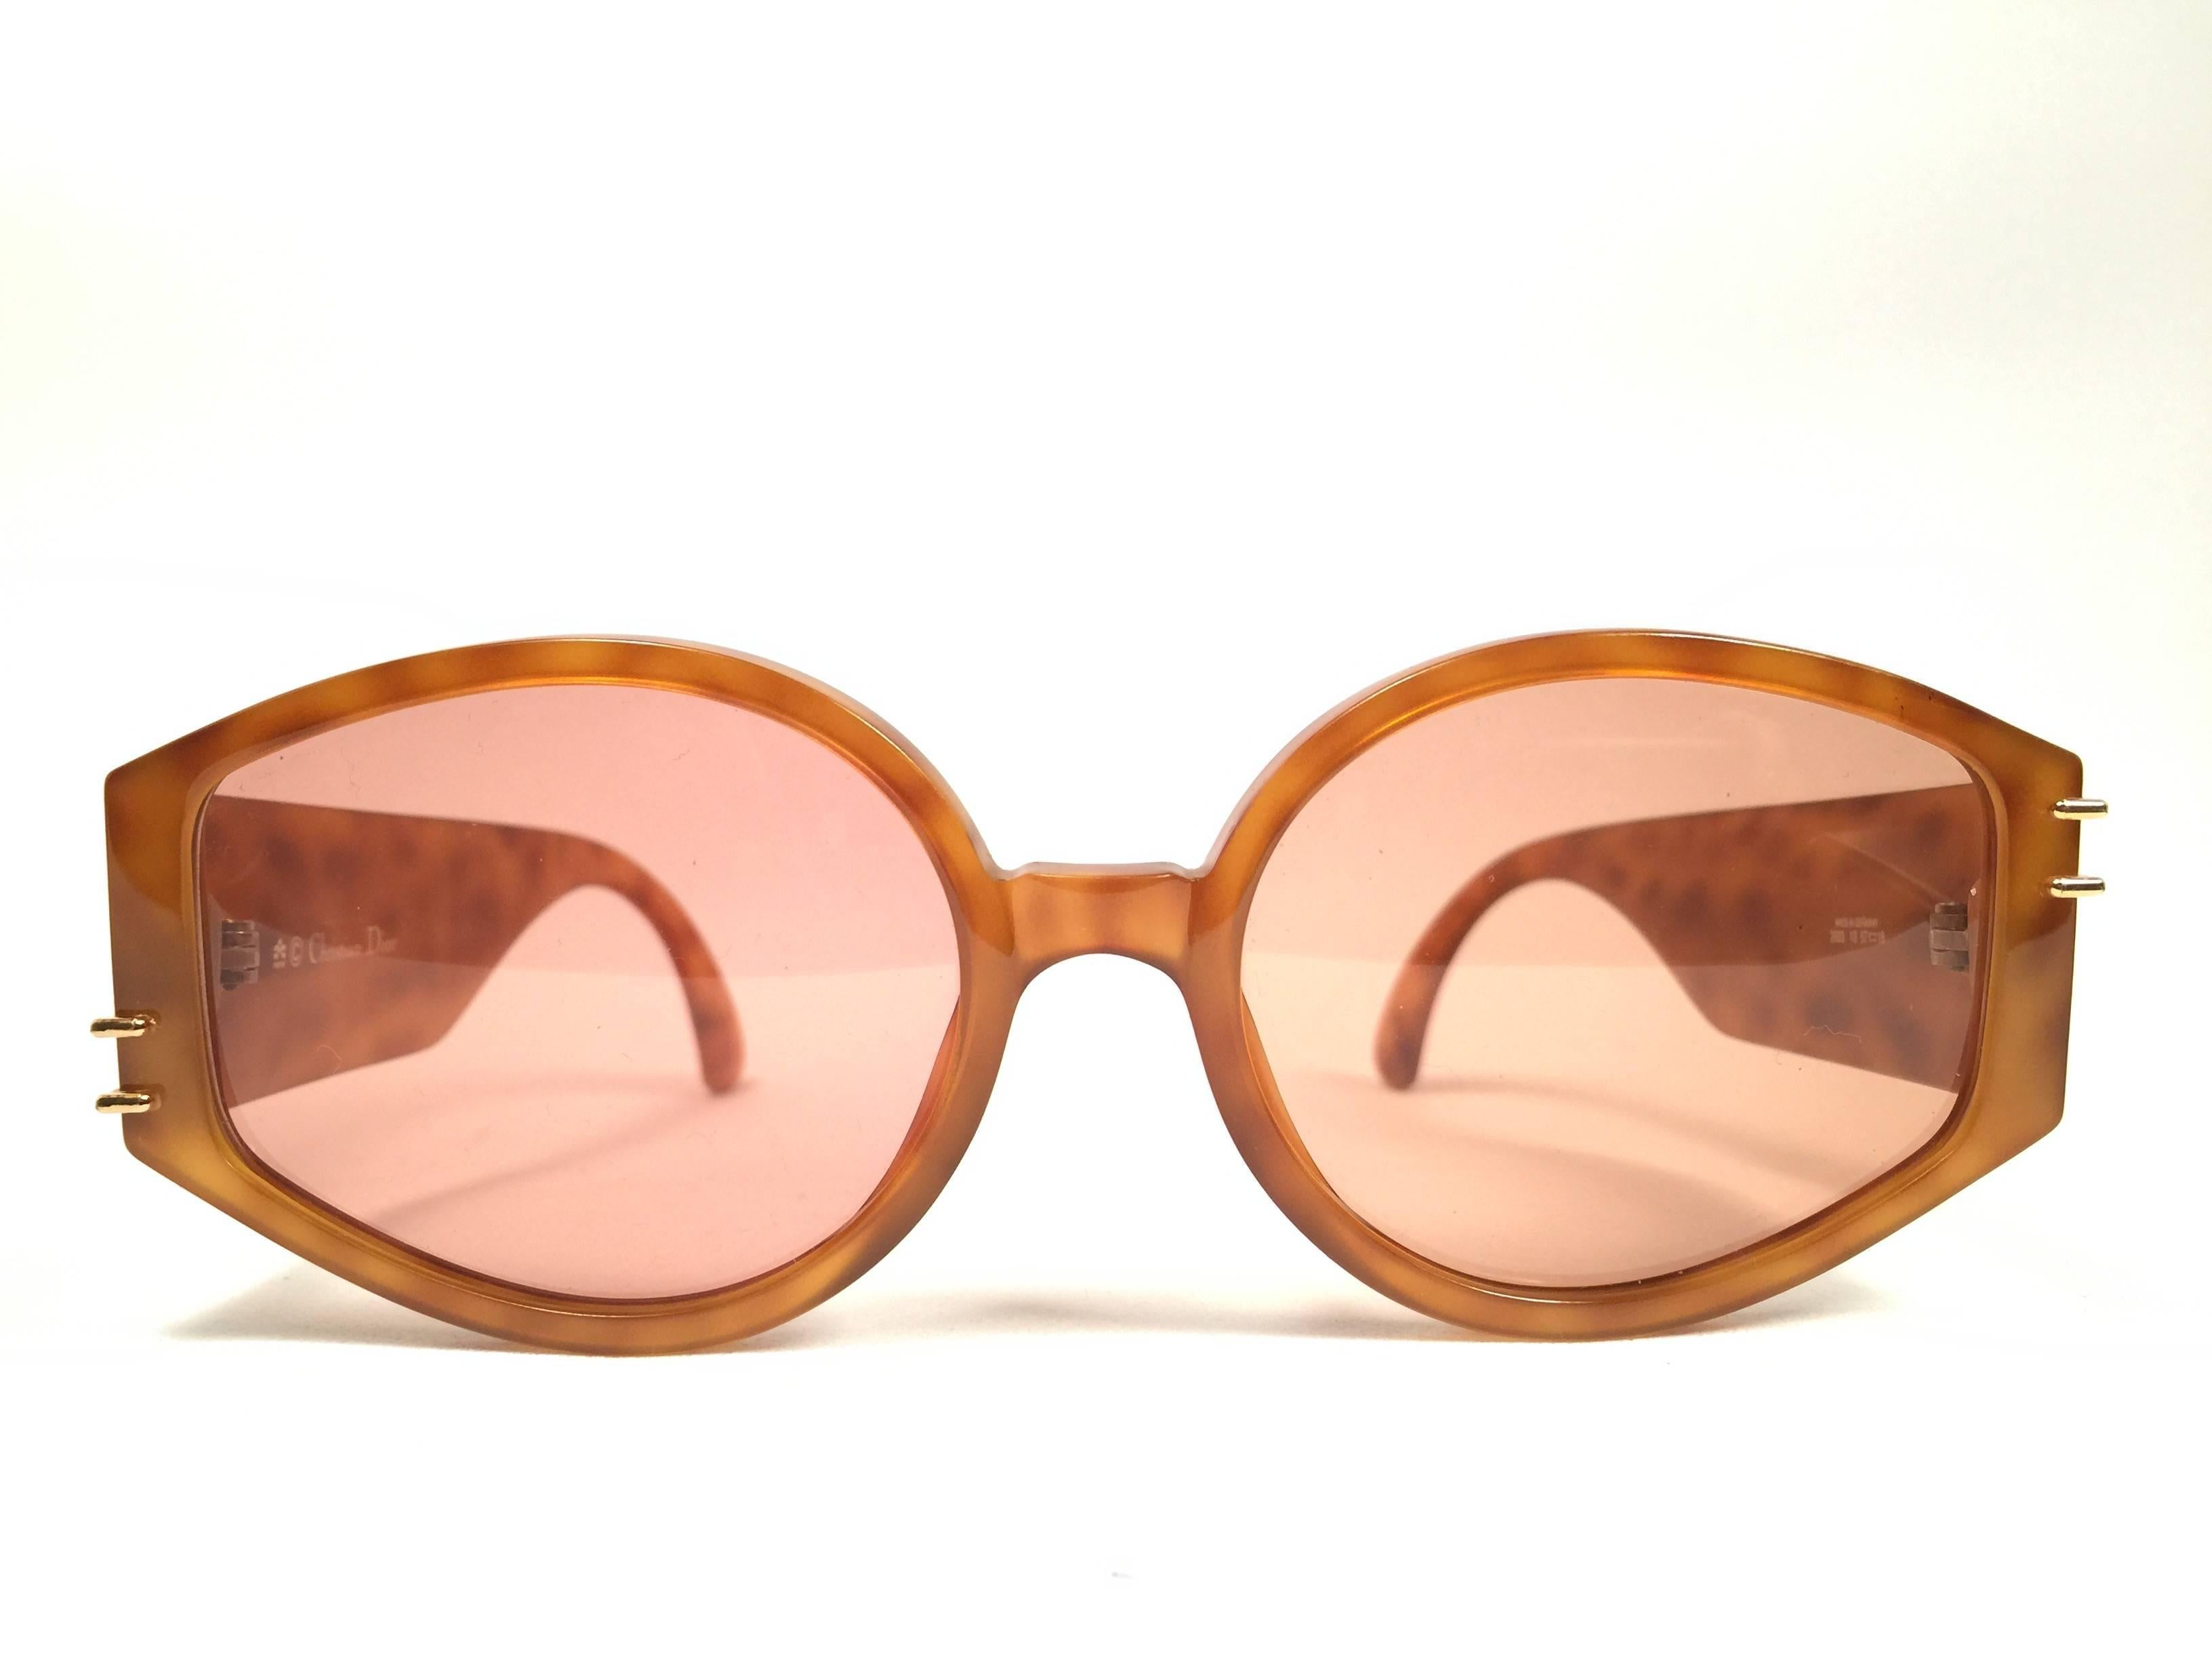 Mint Vintage Christian Dior 2603 translucent honey with gold details 1980's frame with spotless lenses.   
Made in Germany.  

Comes with its original silver Christian Dior Lunettes sleeve.